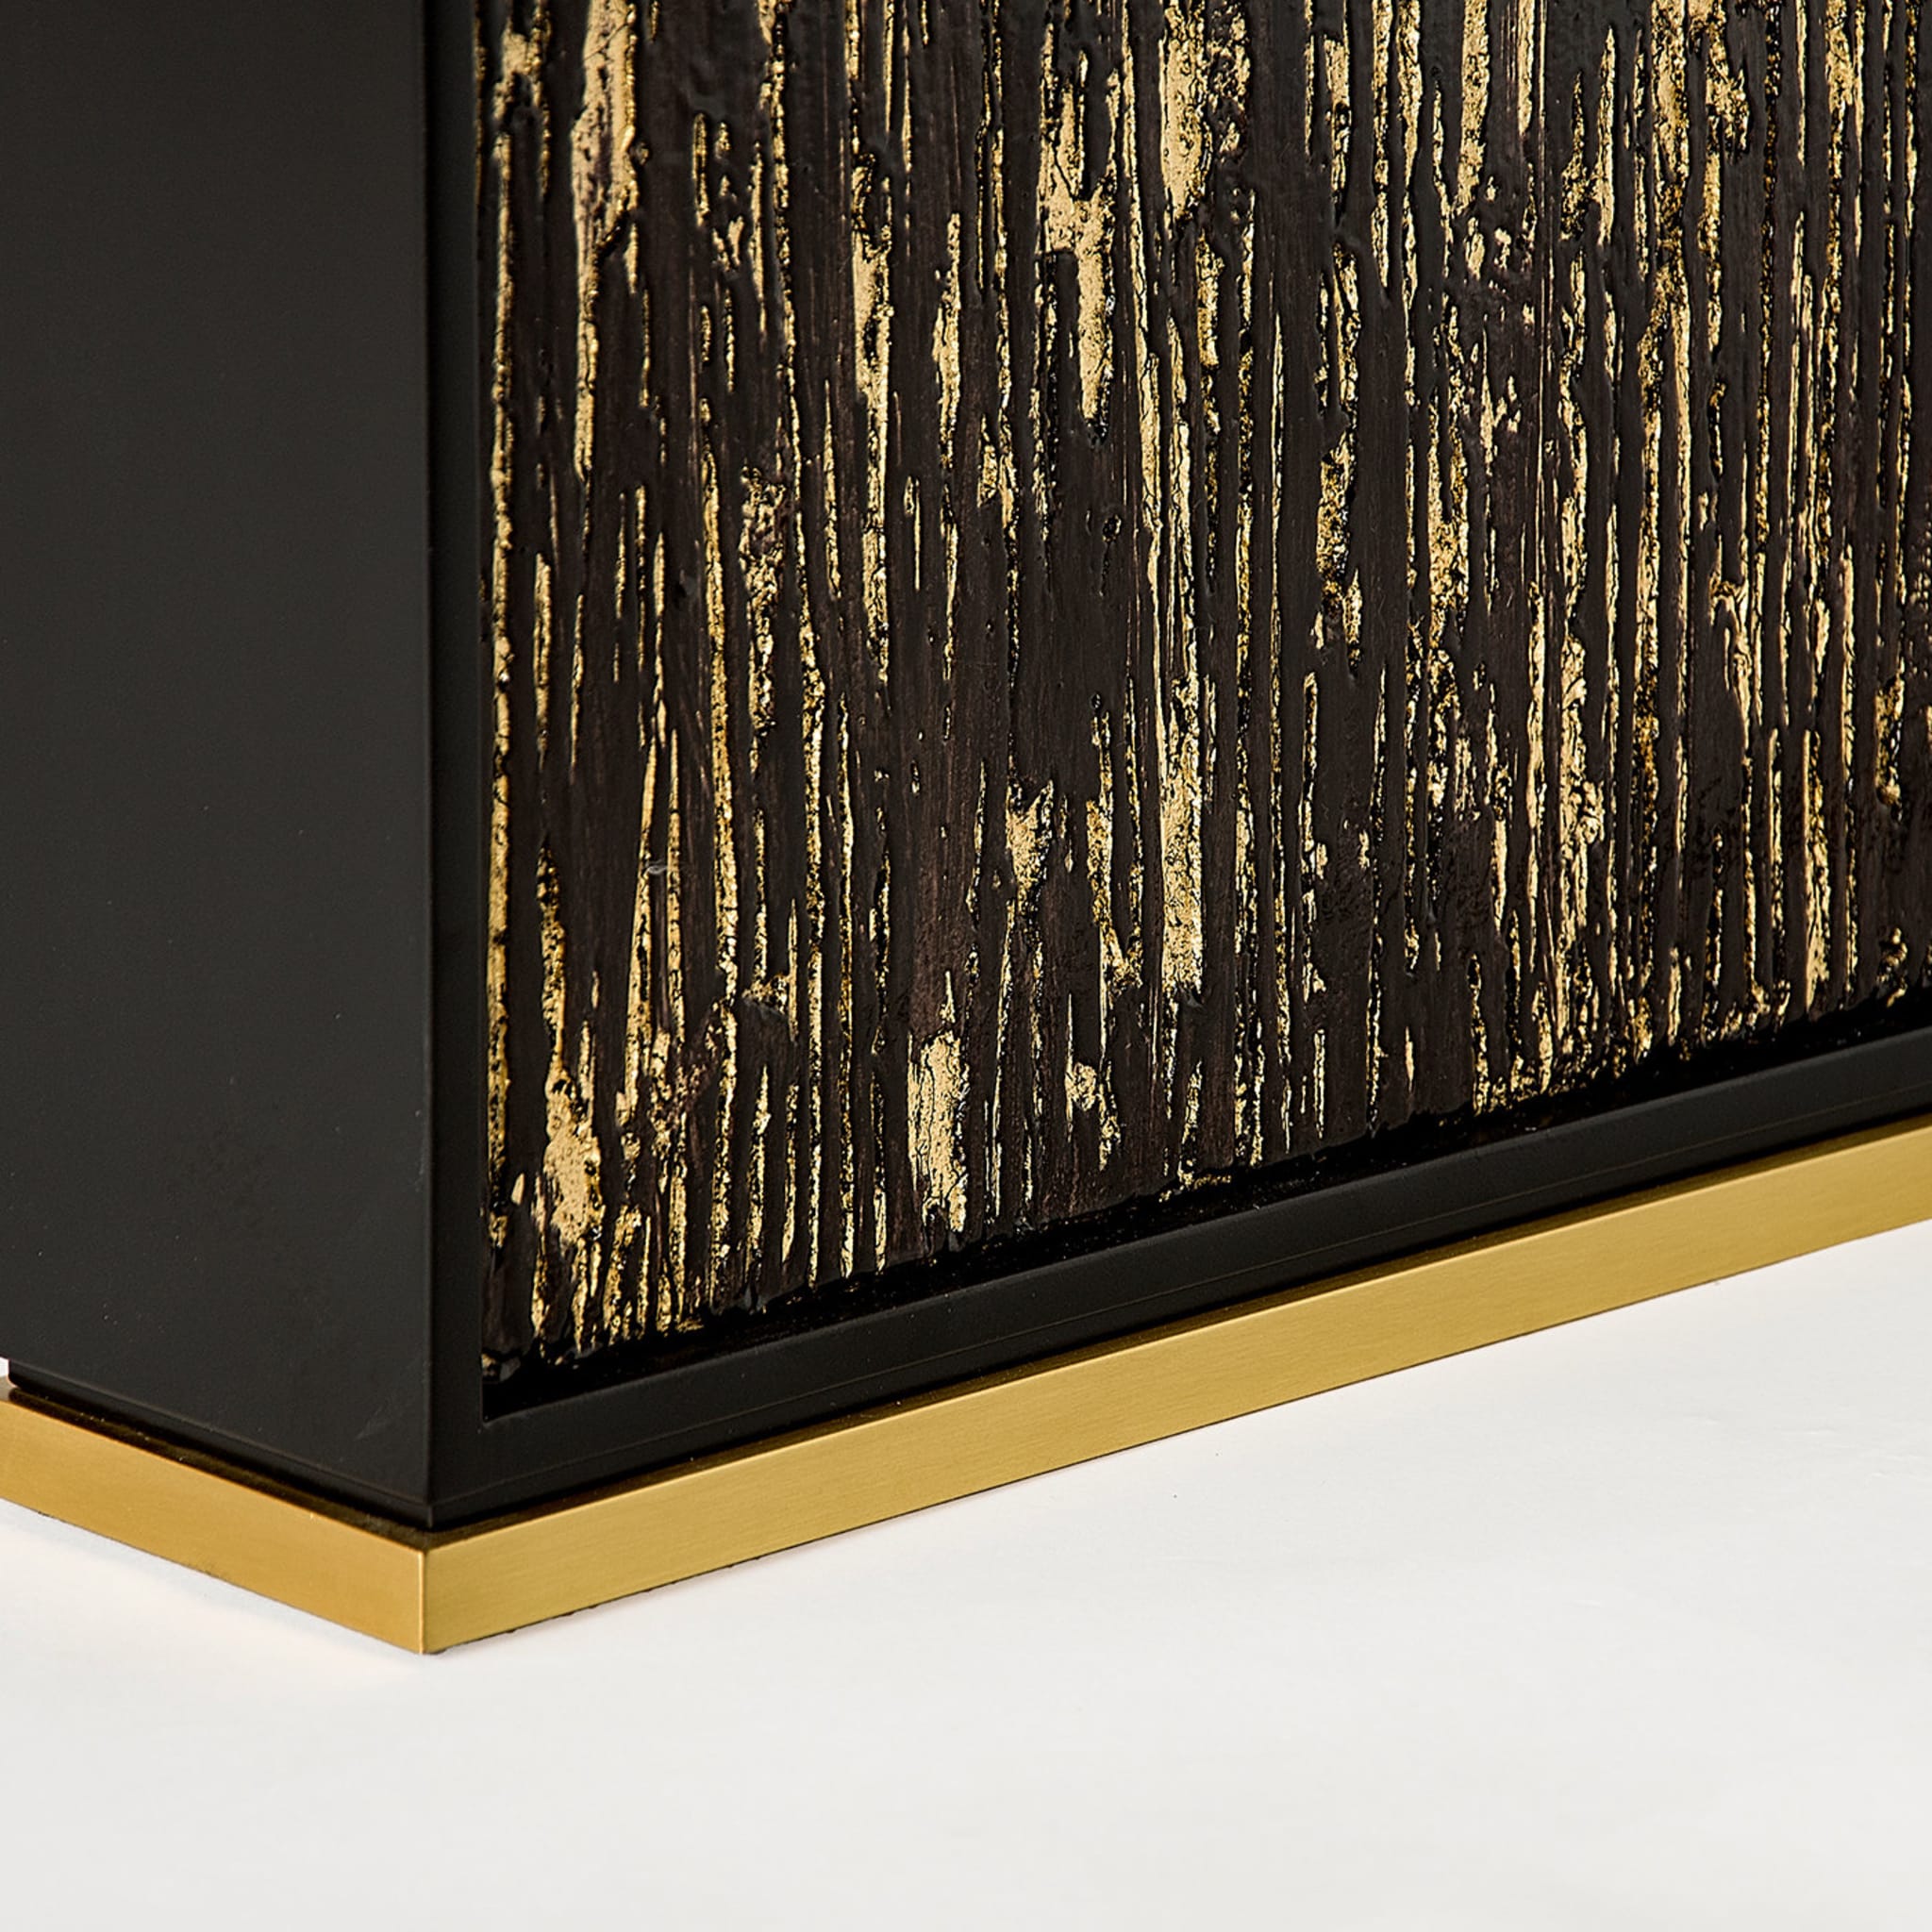 Console table in black and gold wood - Alternative view 4